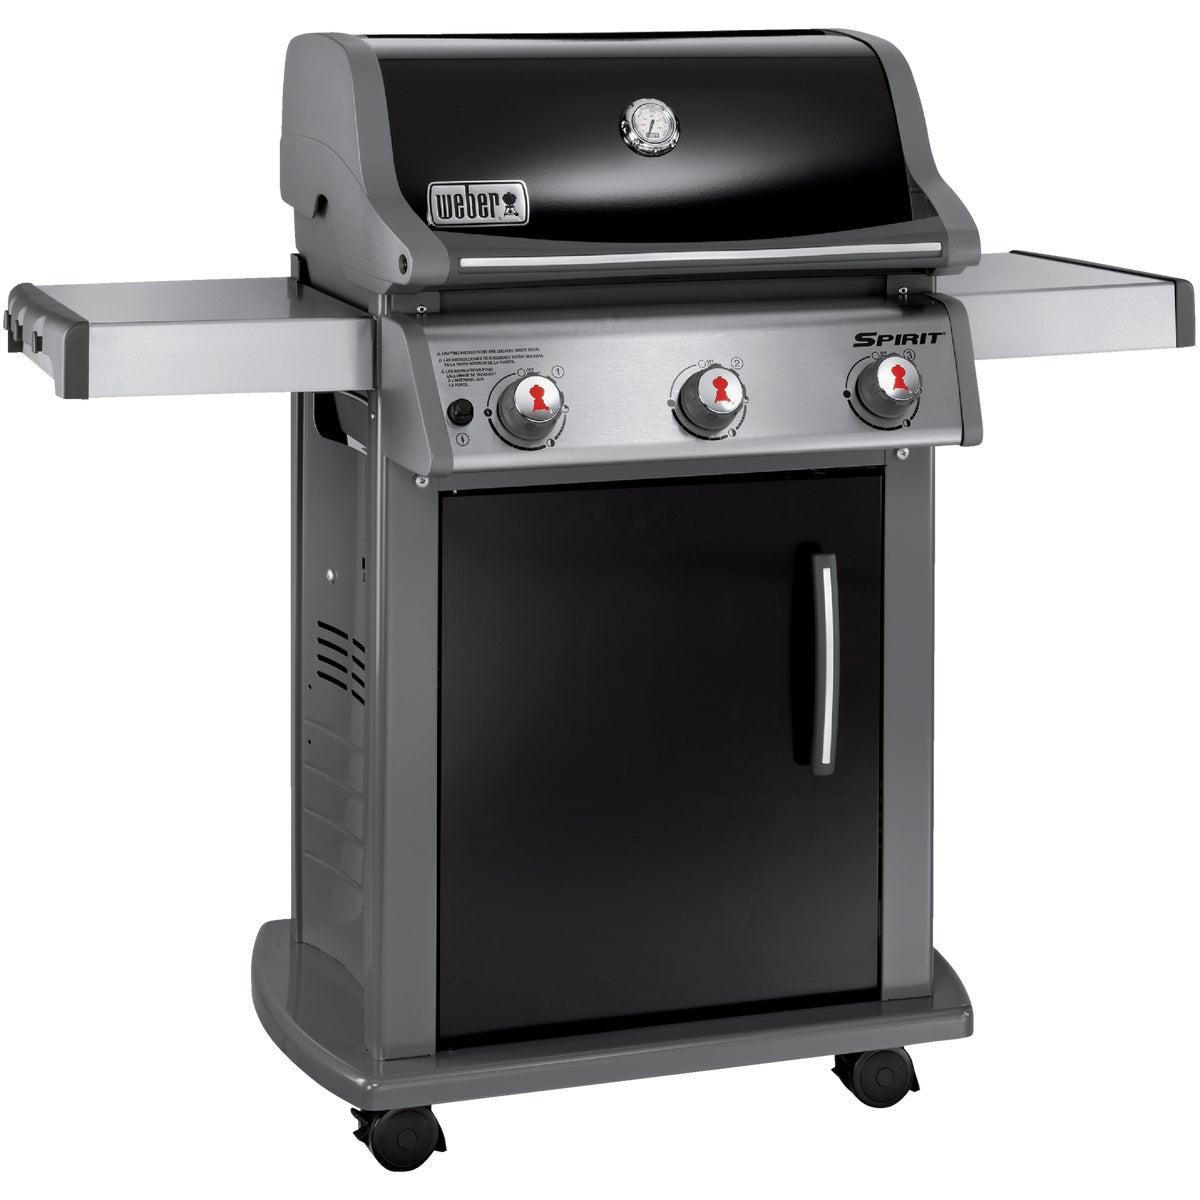 Item 814104, Durable LP gas grill. Features 424 Sq. In.